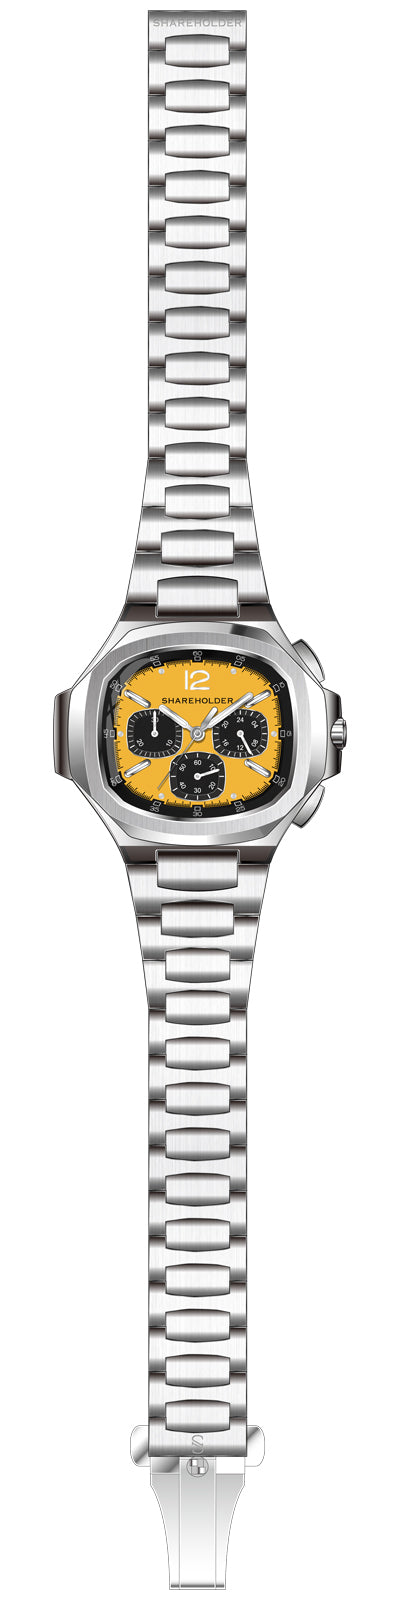 Frontliner Chronograph Stainless Steel Yellow